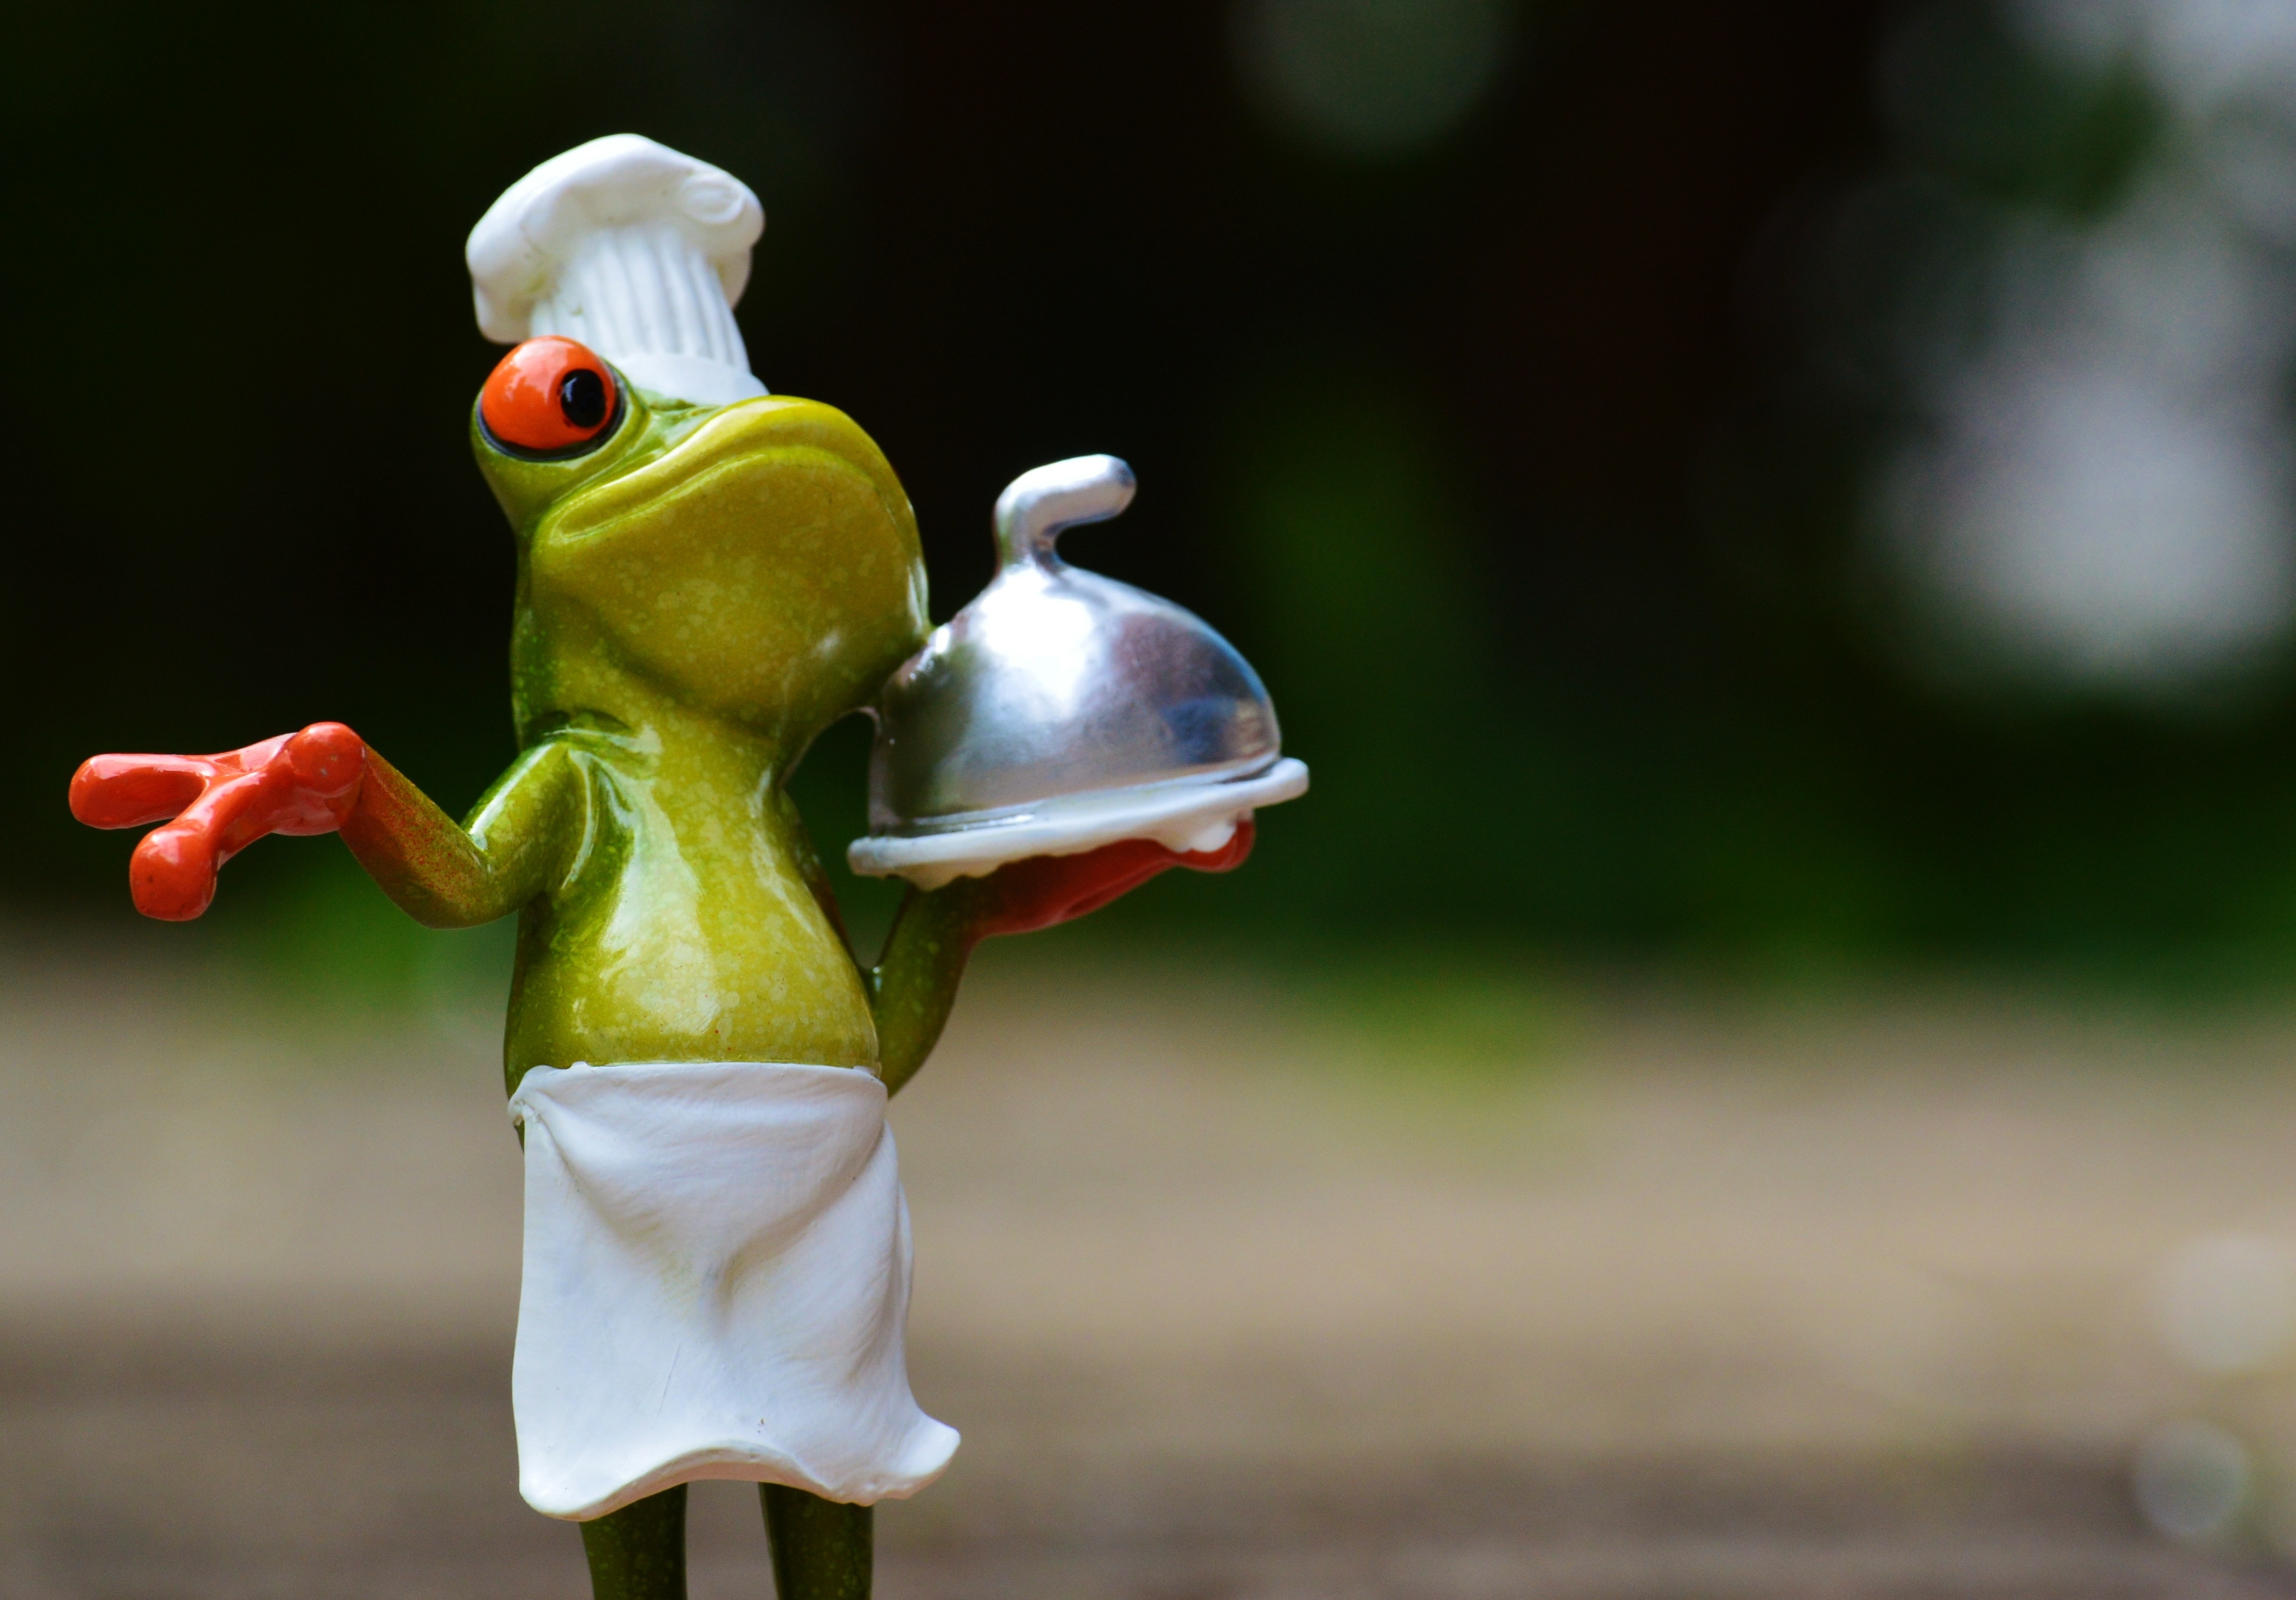 photo of a frog chef holding tray